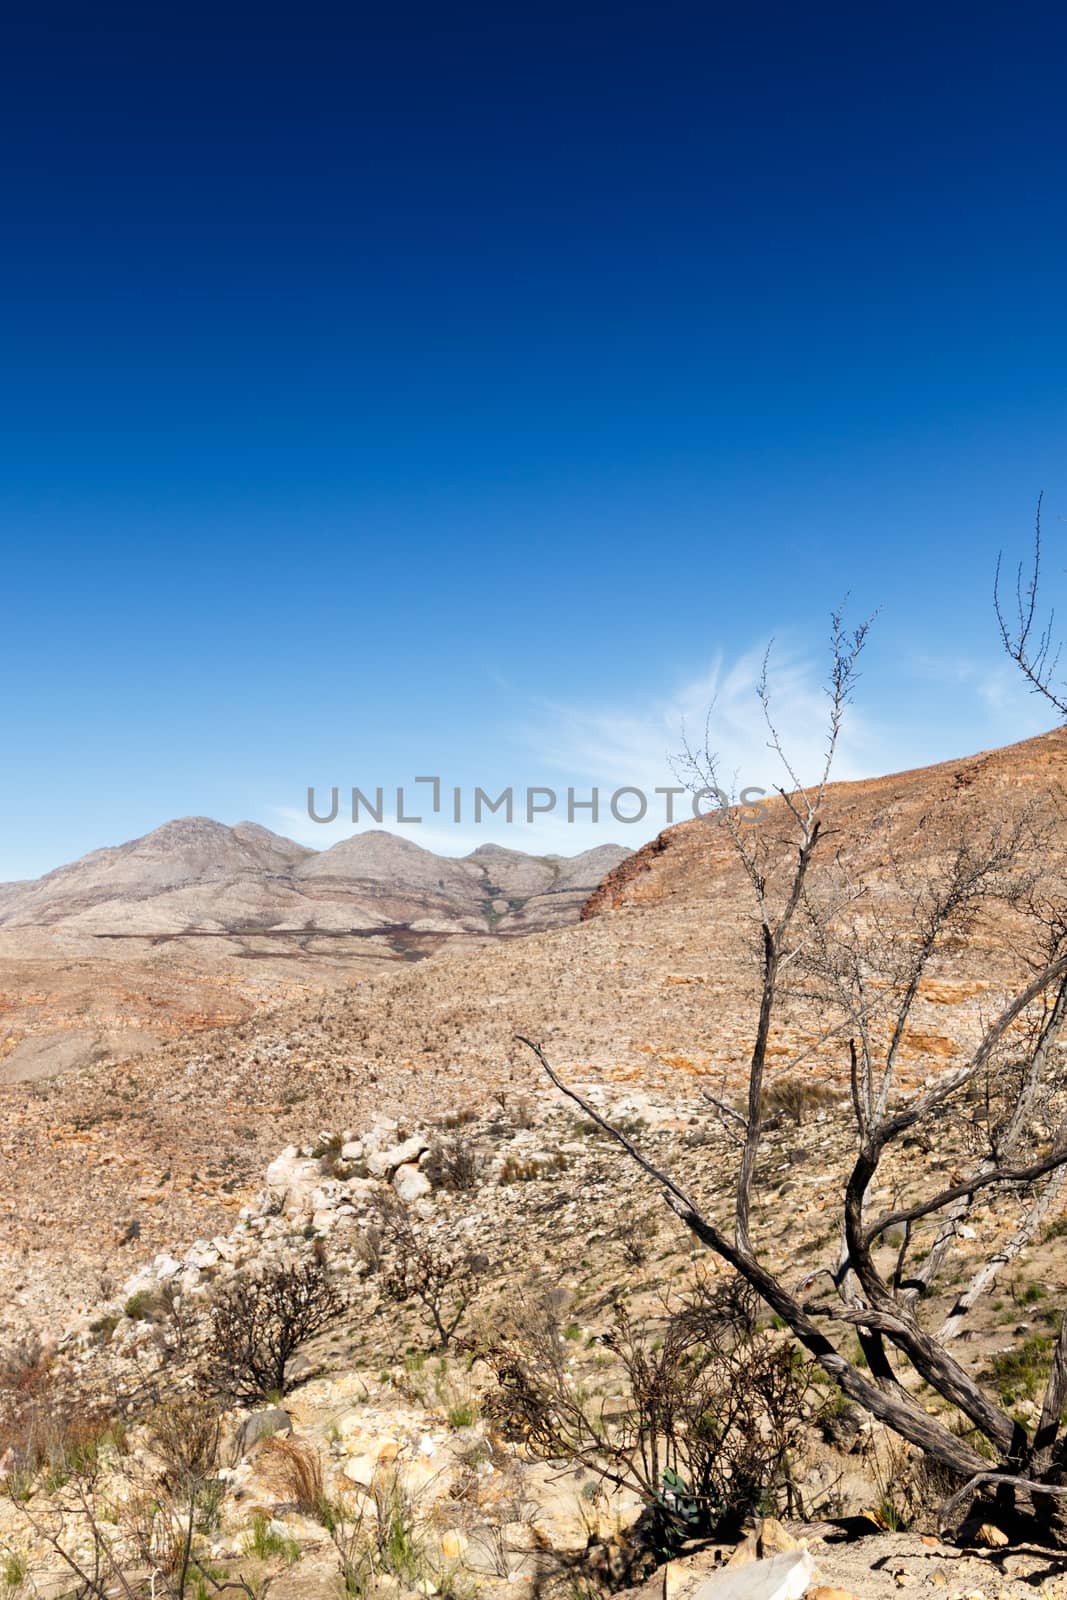 Dead tree with Beautiful clouds and mountains overlooking the barren landscape.